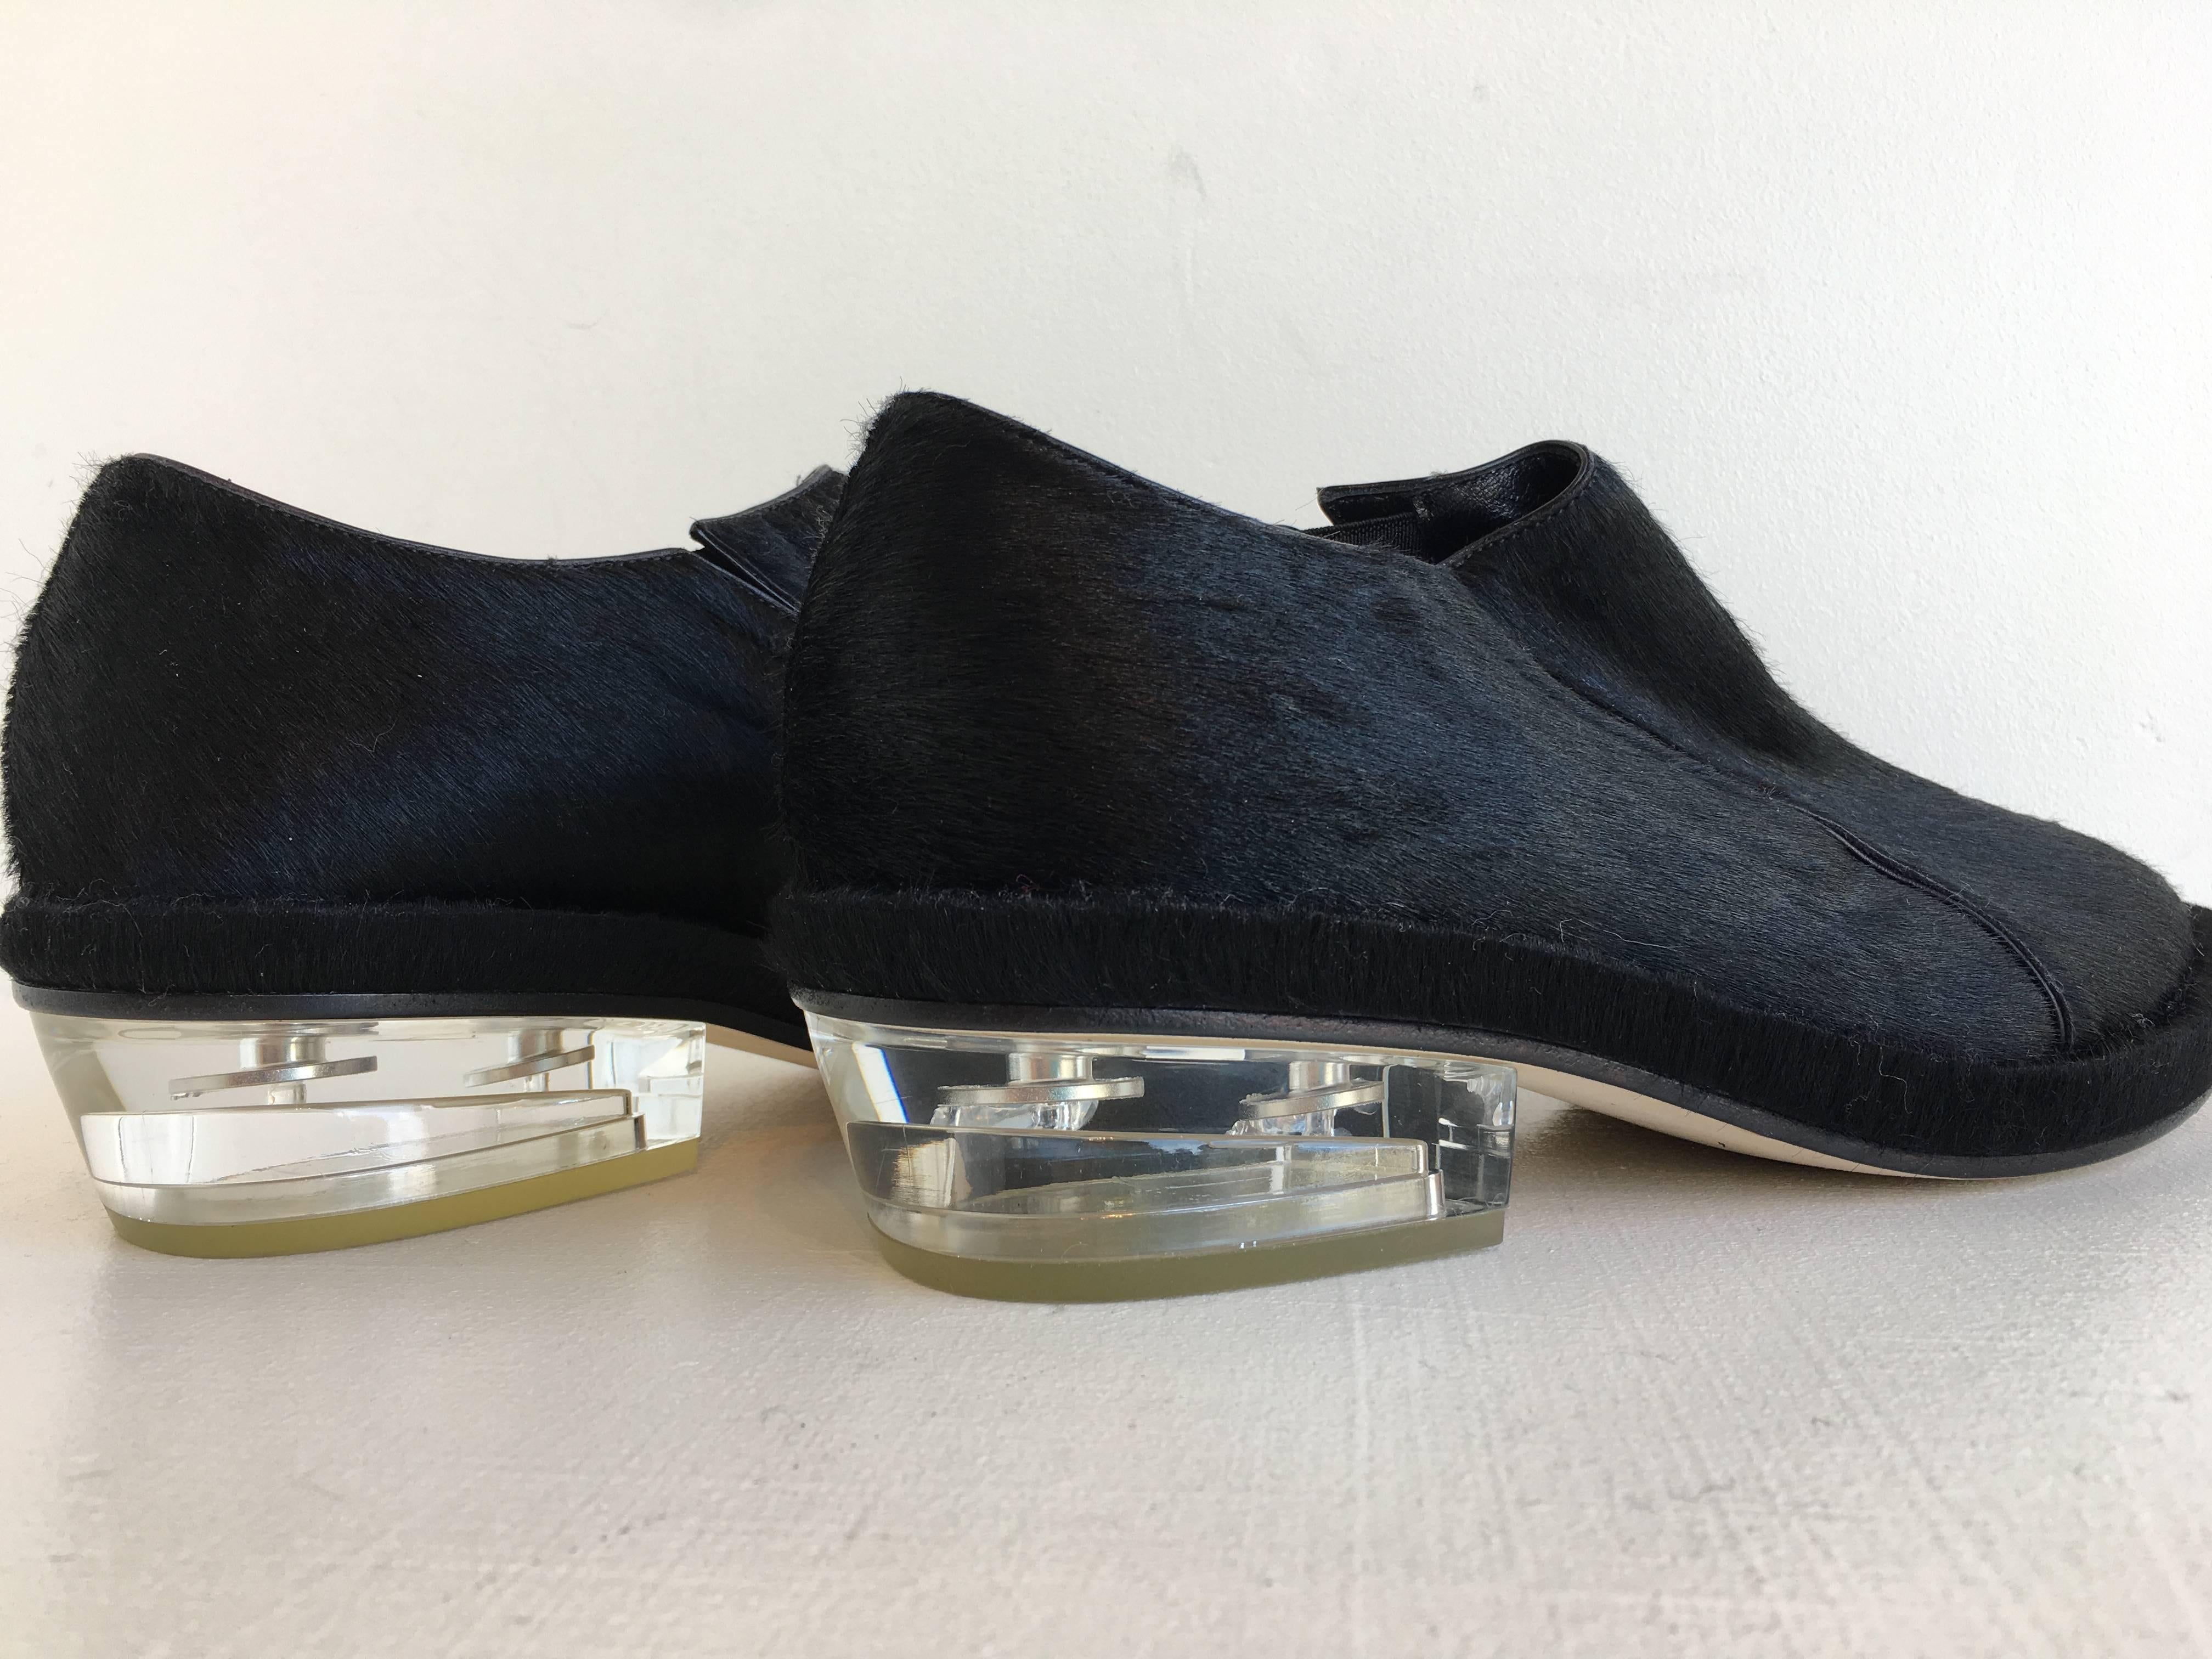 Simone Rocha black pointy toe pony-hair shoes with clear 1.5 inch resin heel.